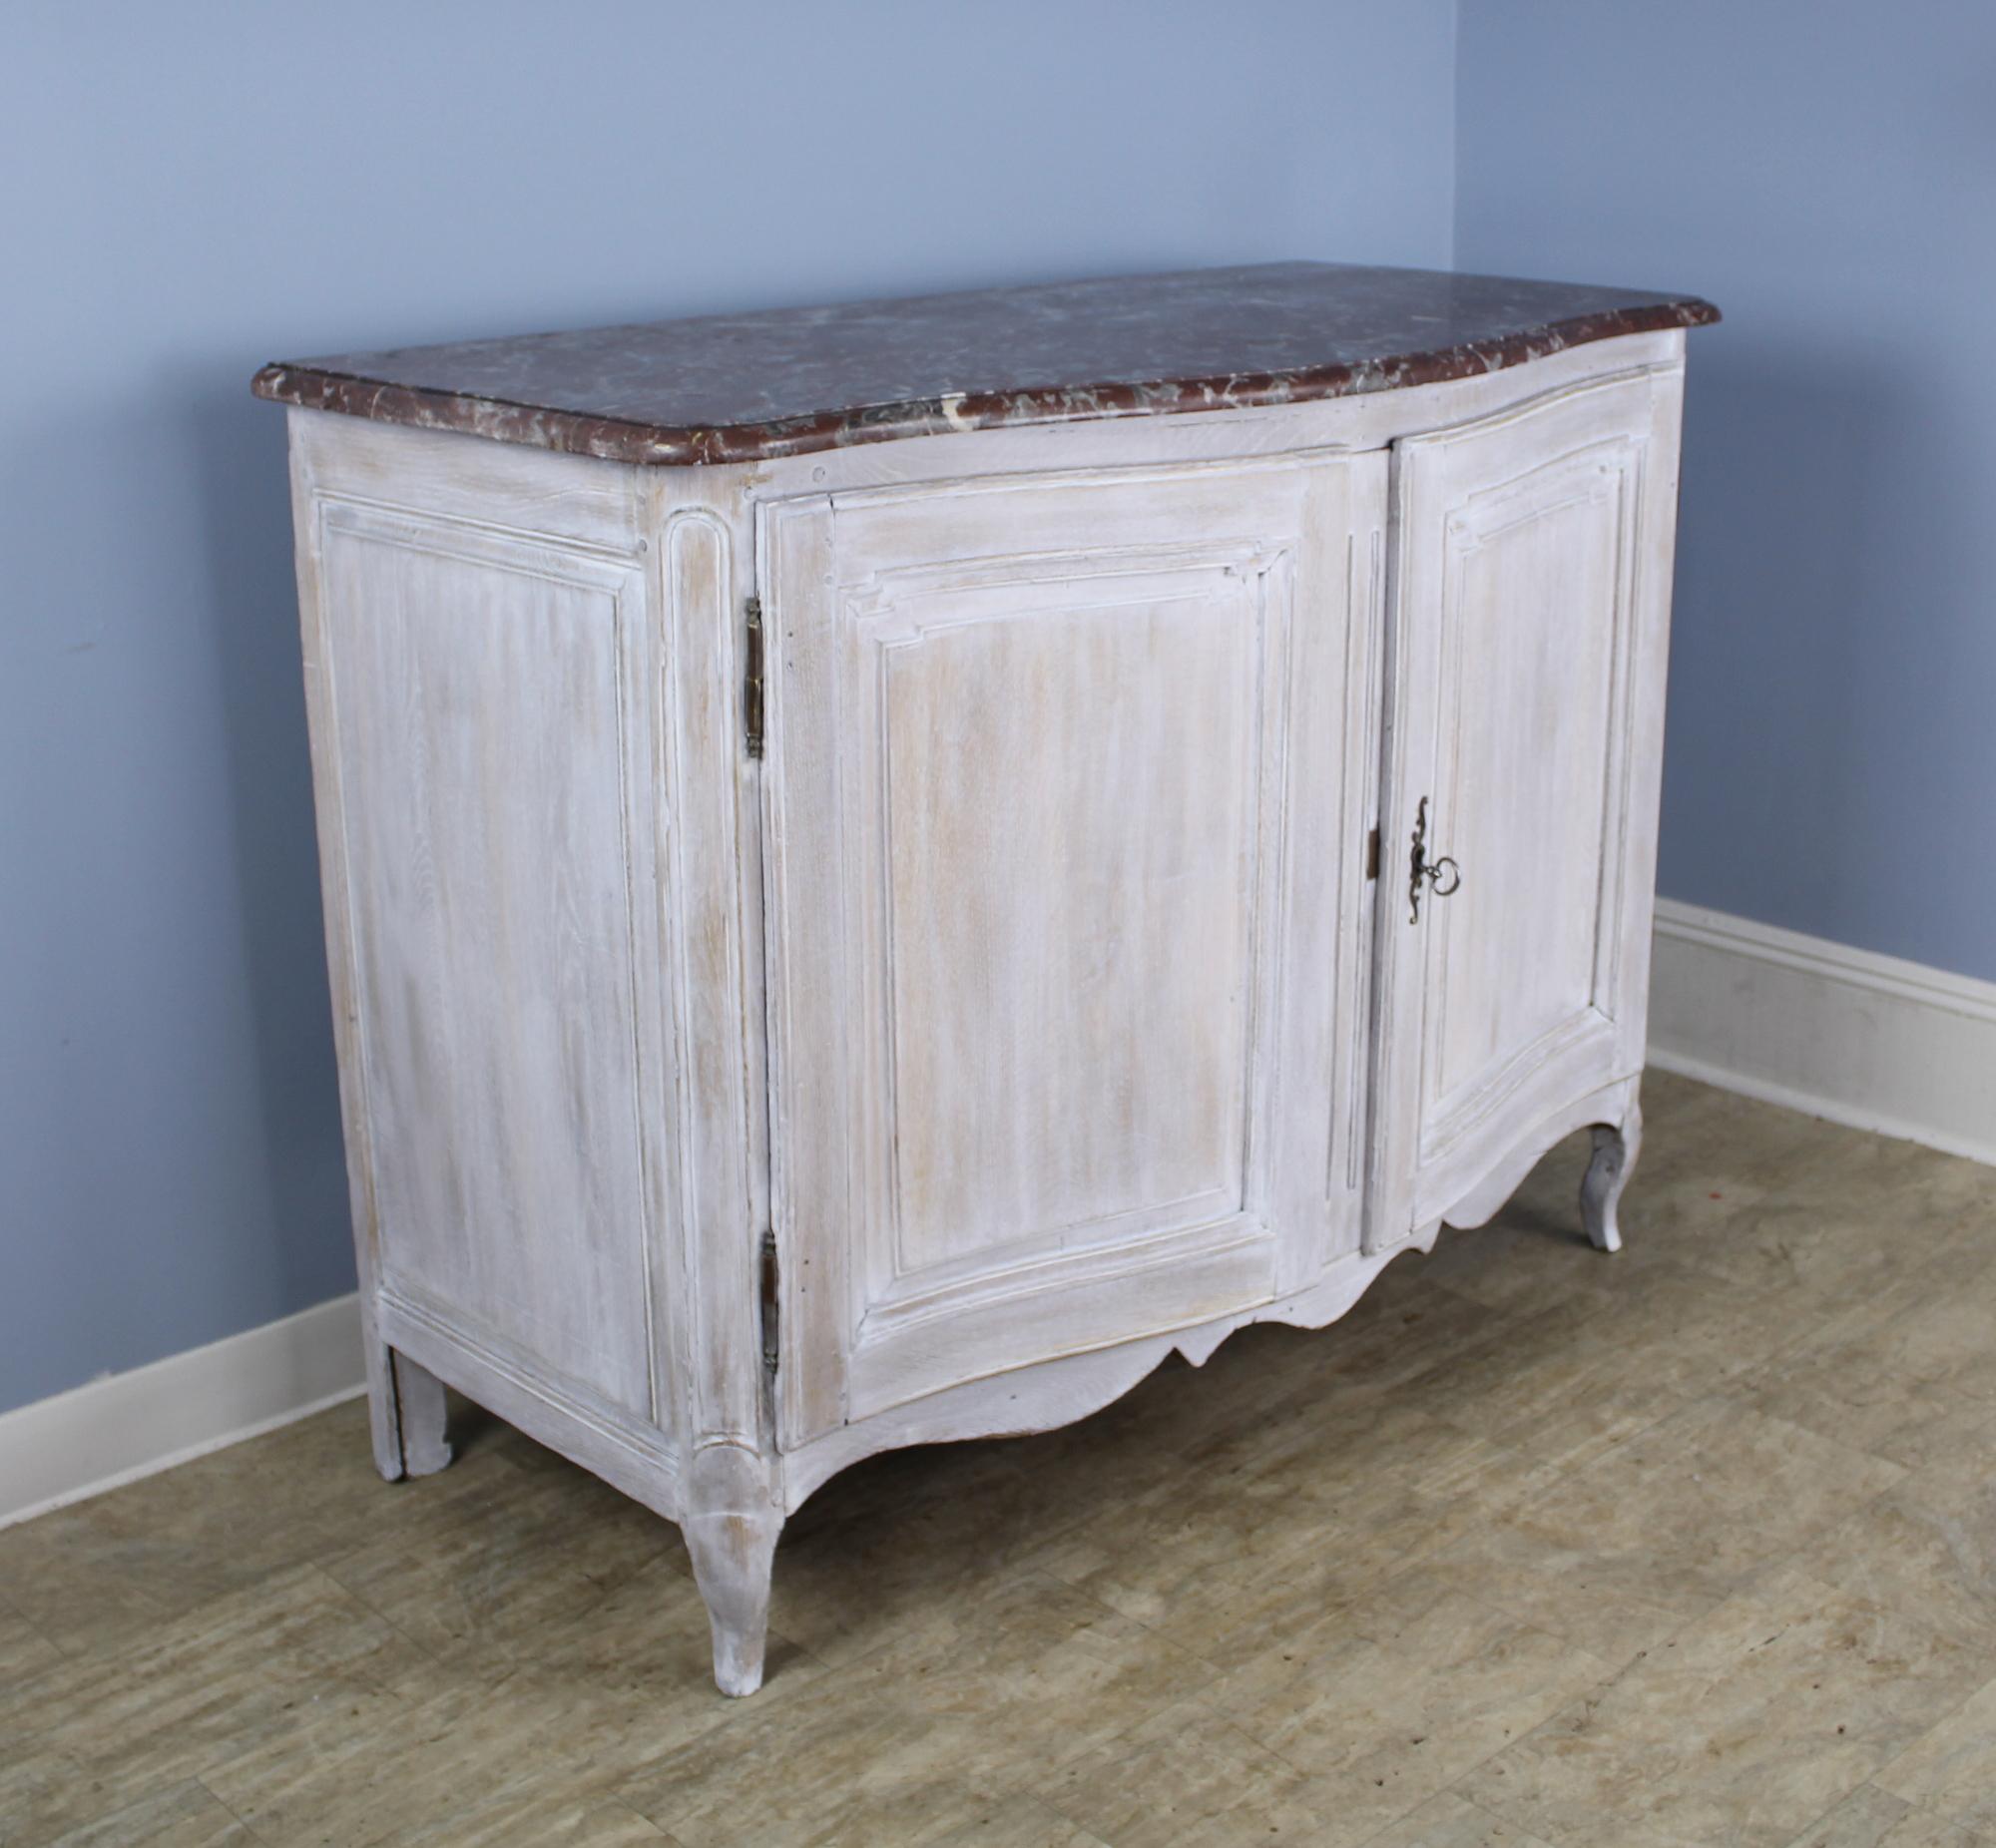 A handsome bowfront buffet, with original dramatically veined marble and newly painted in faux distressed white. Fancifully carved scalloped apron and corner detail. The single interior shelf is not adjustable. The piece closes securely with an